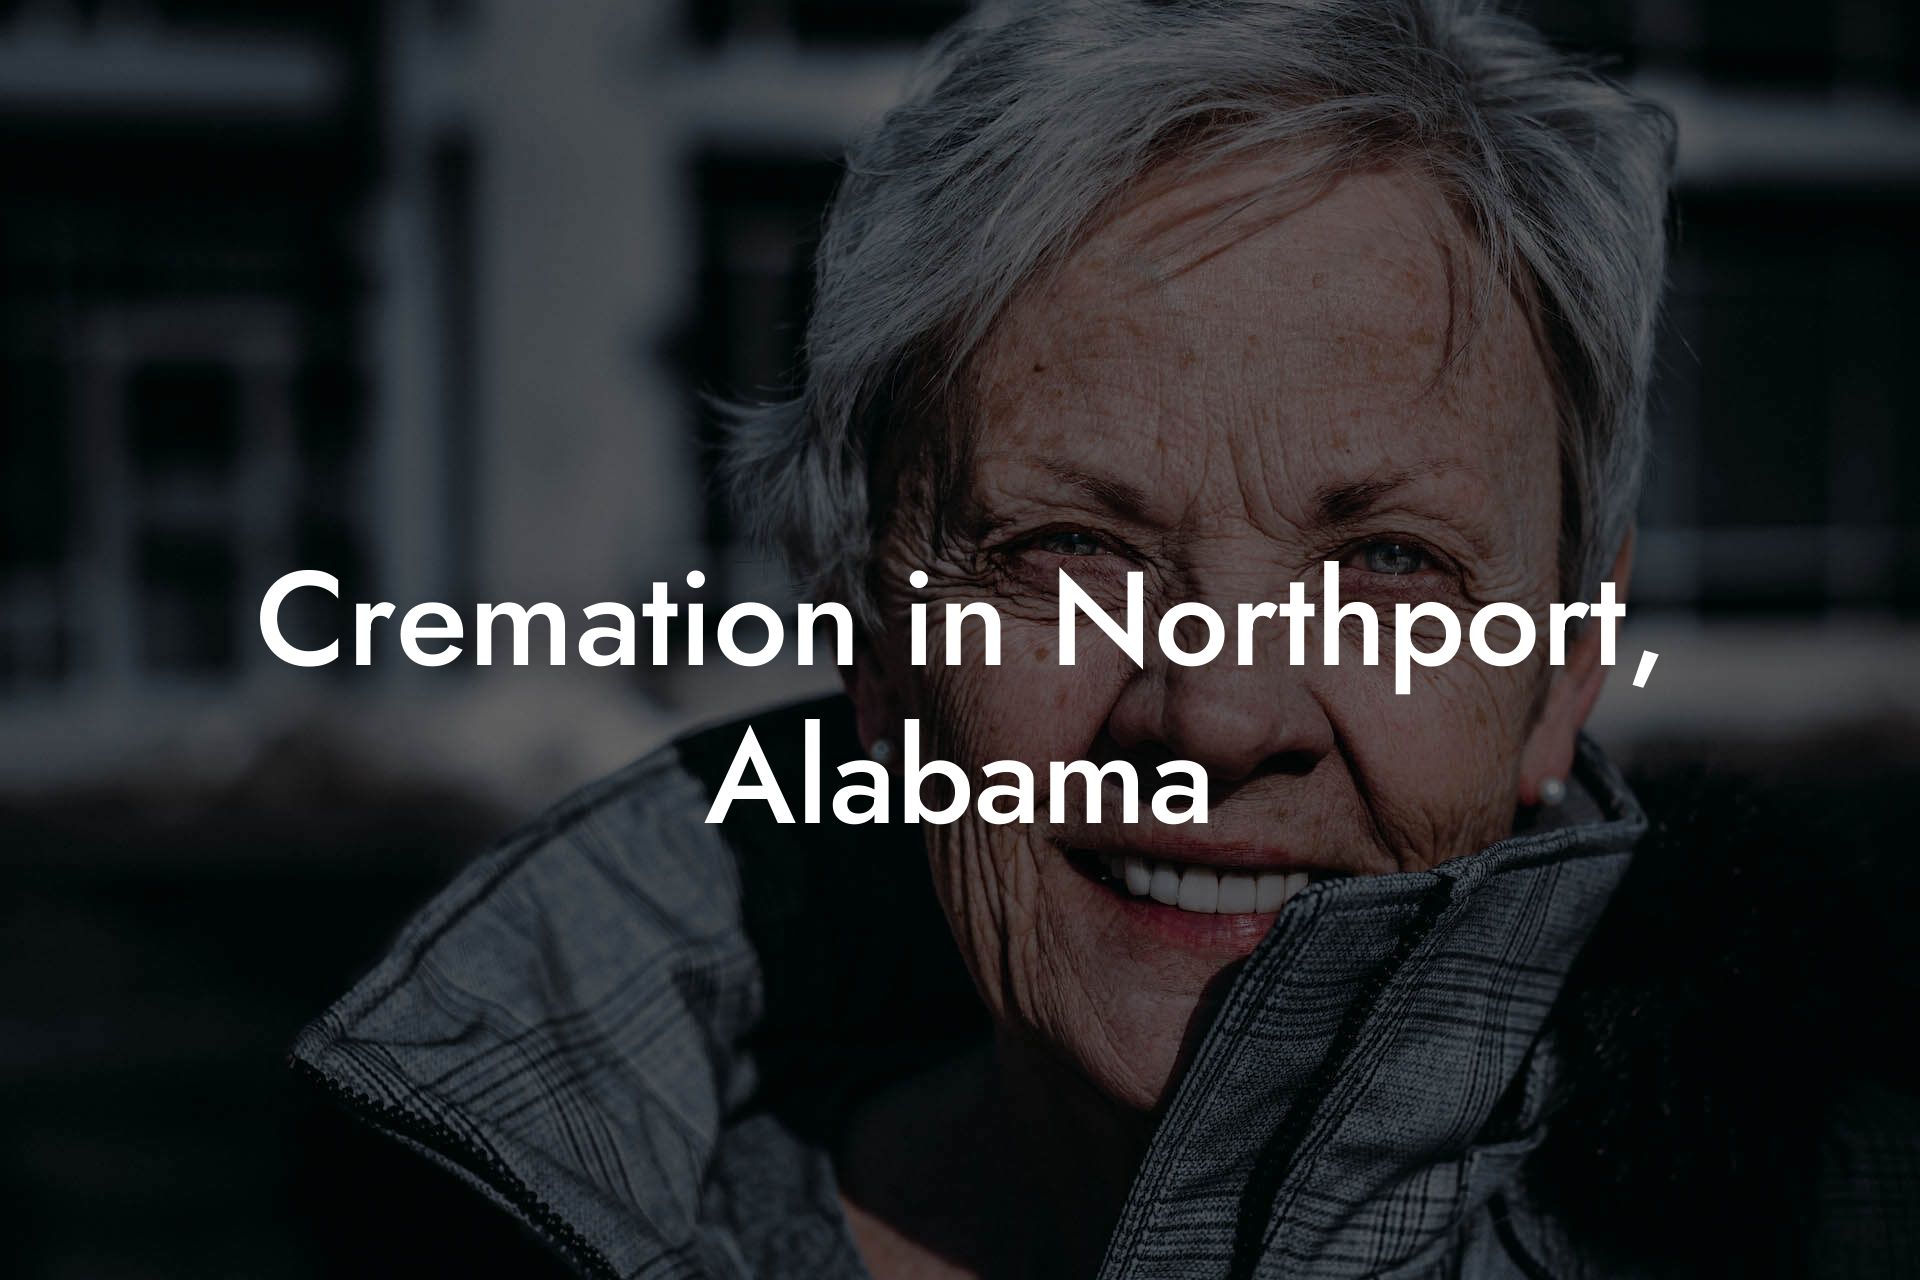 Cremation in Northport, Alabama